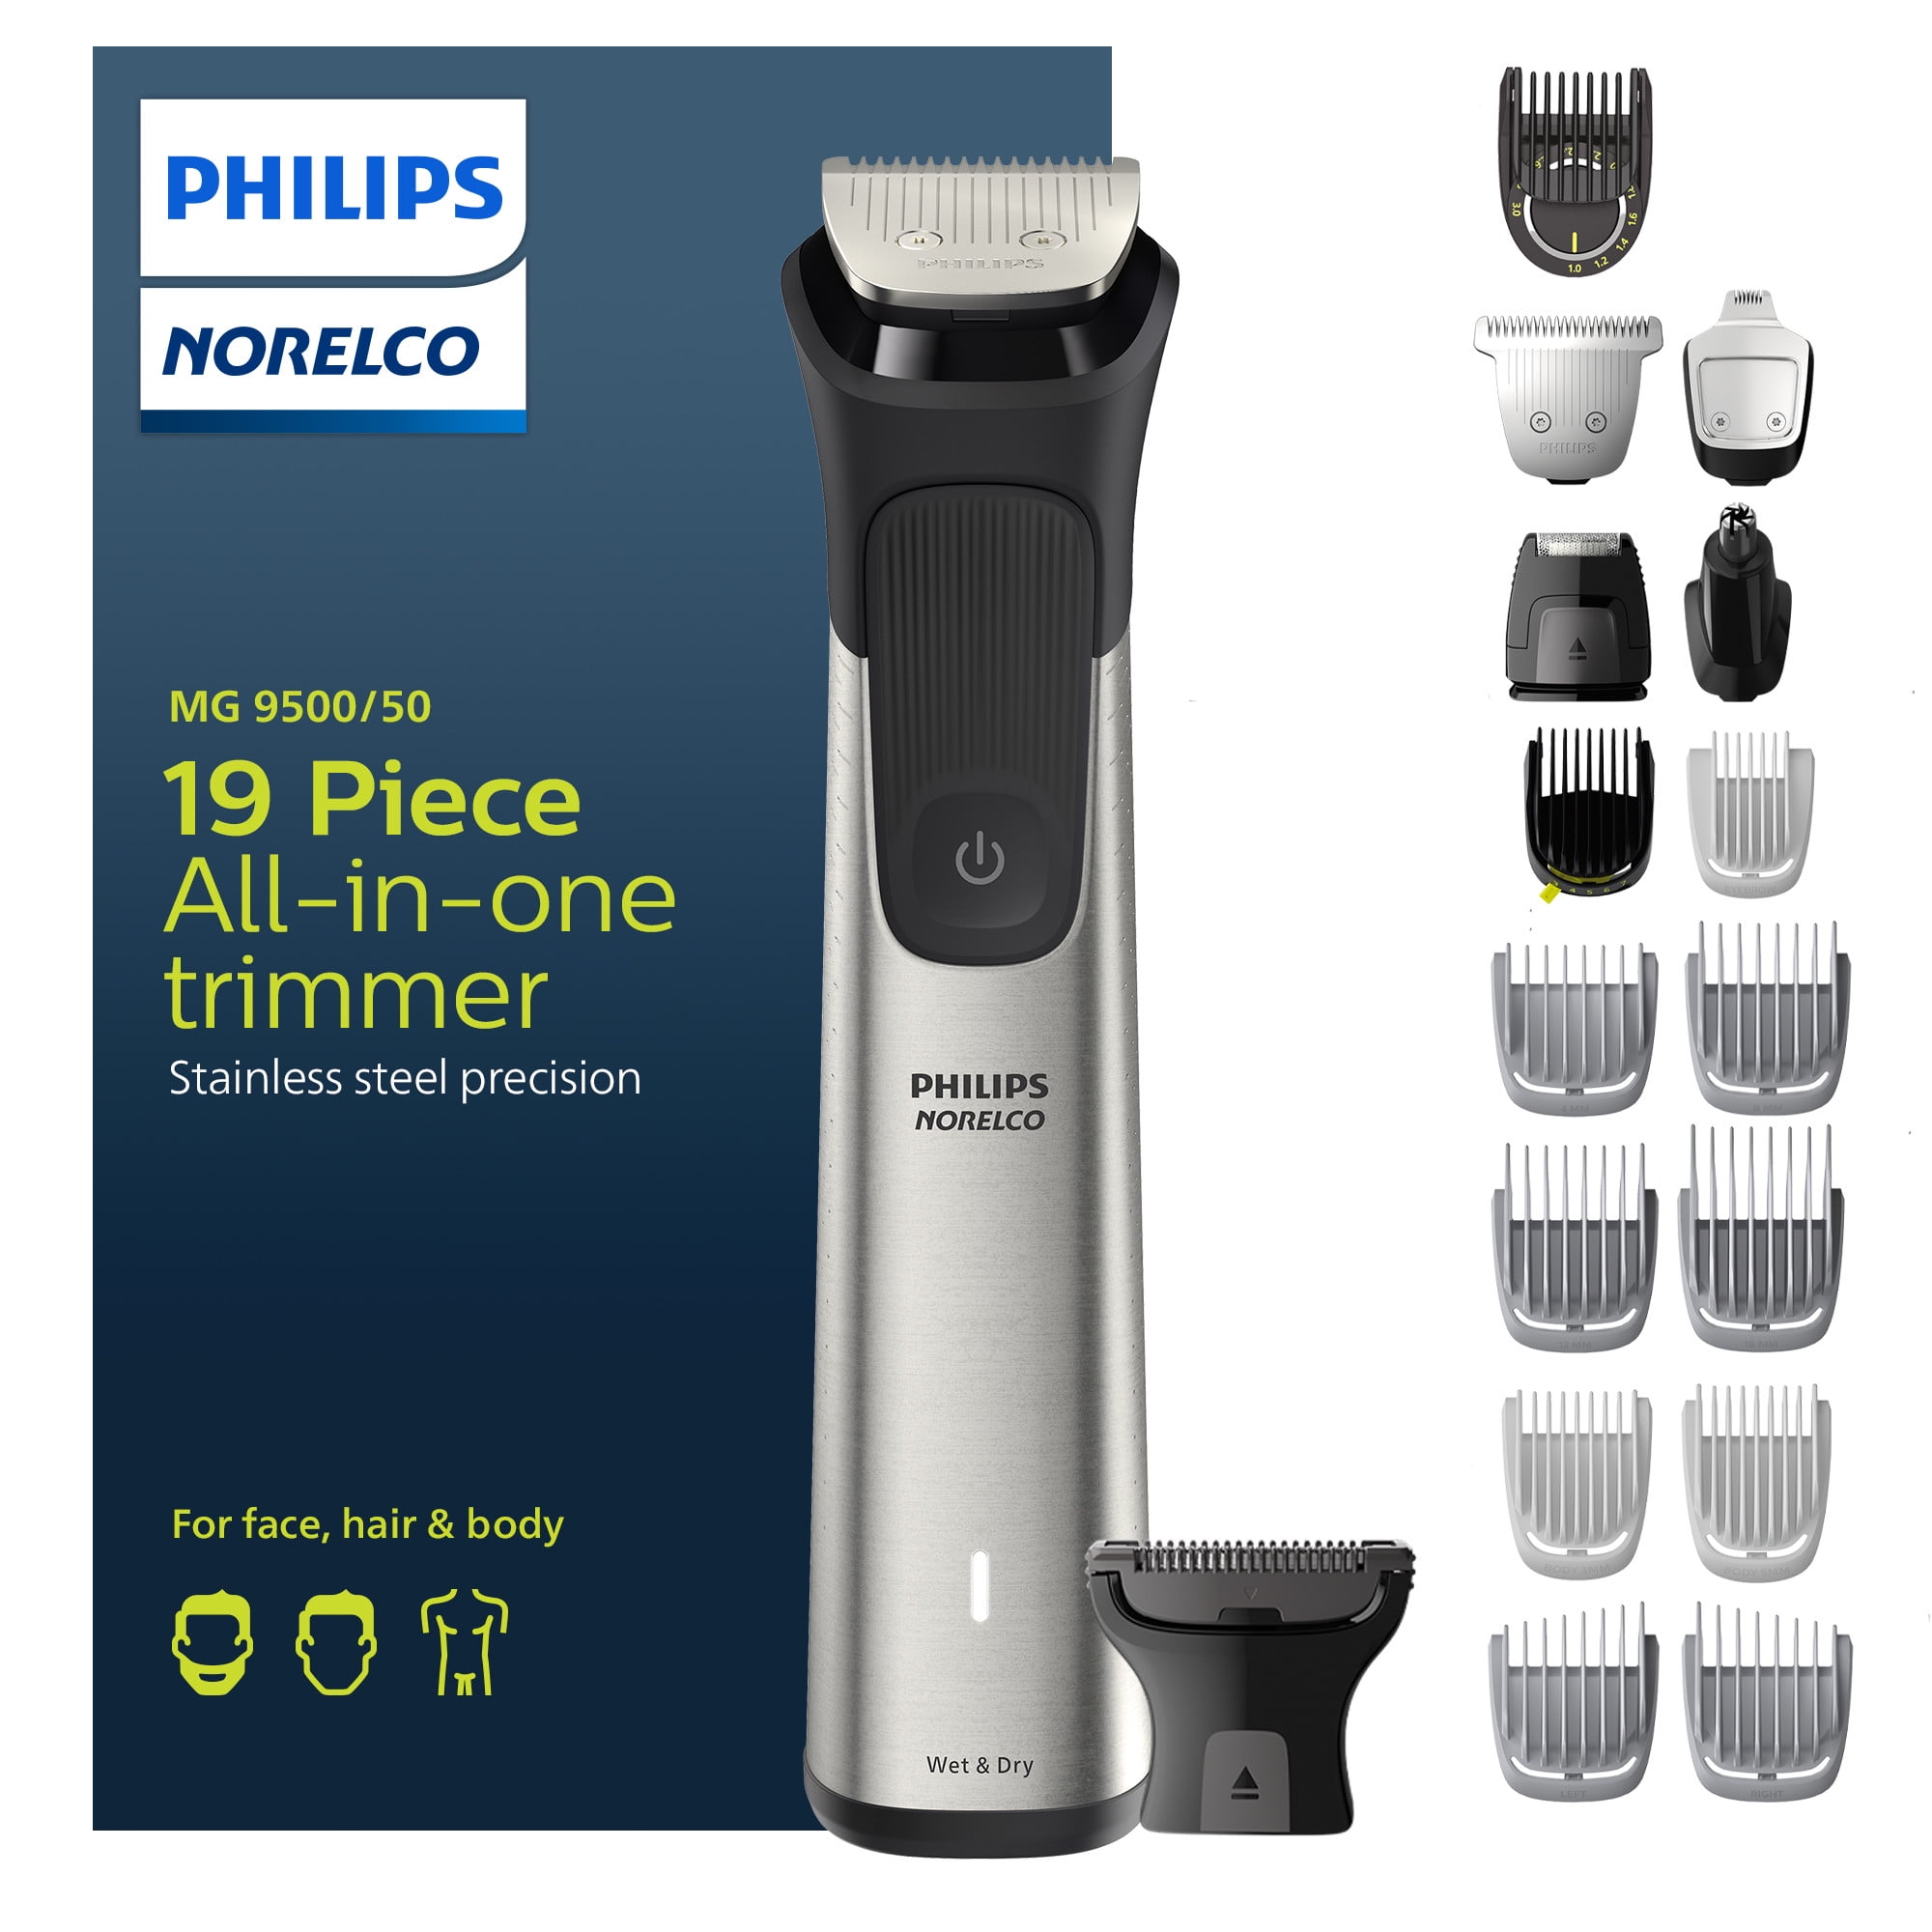 New Philips Norelco 9000, Men'S All In One Trimmer For Beard, Head, Hair, Face, Body, and Groin No Blade Oil Needed, MG9500/50 - Walmart.com